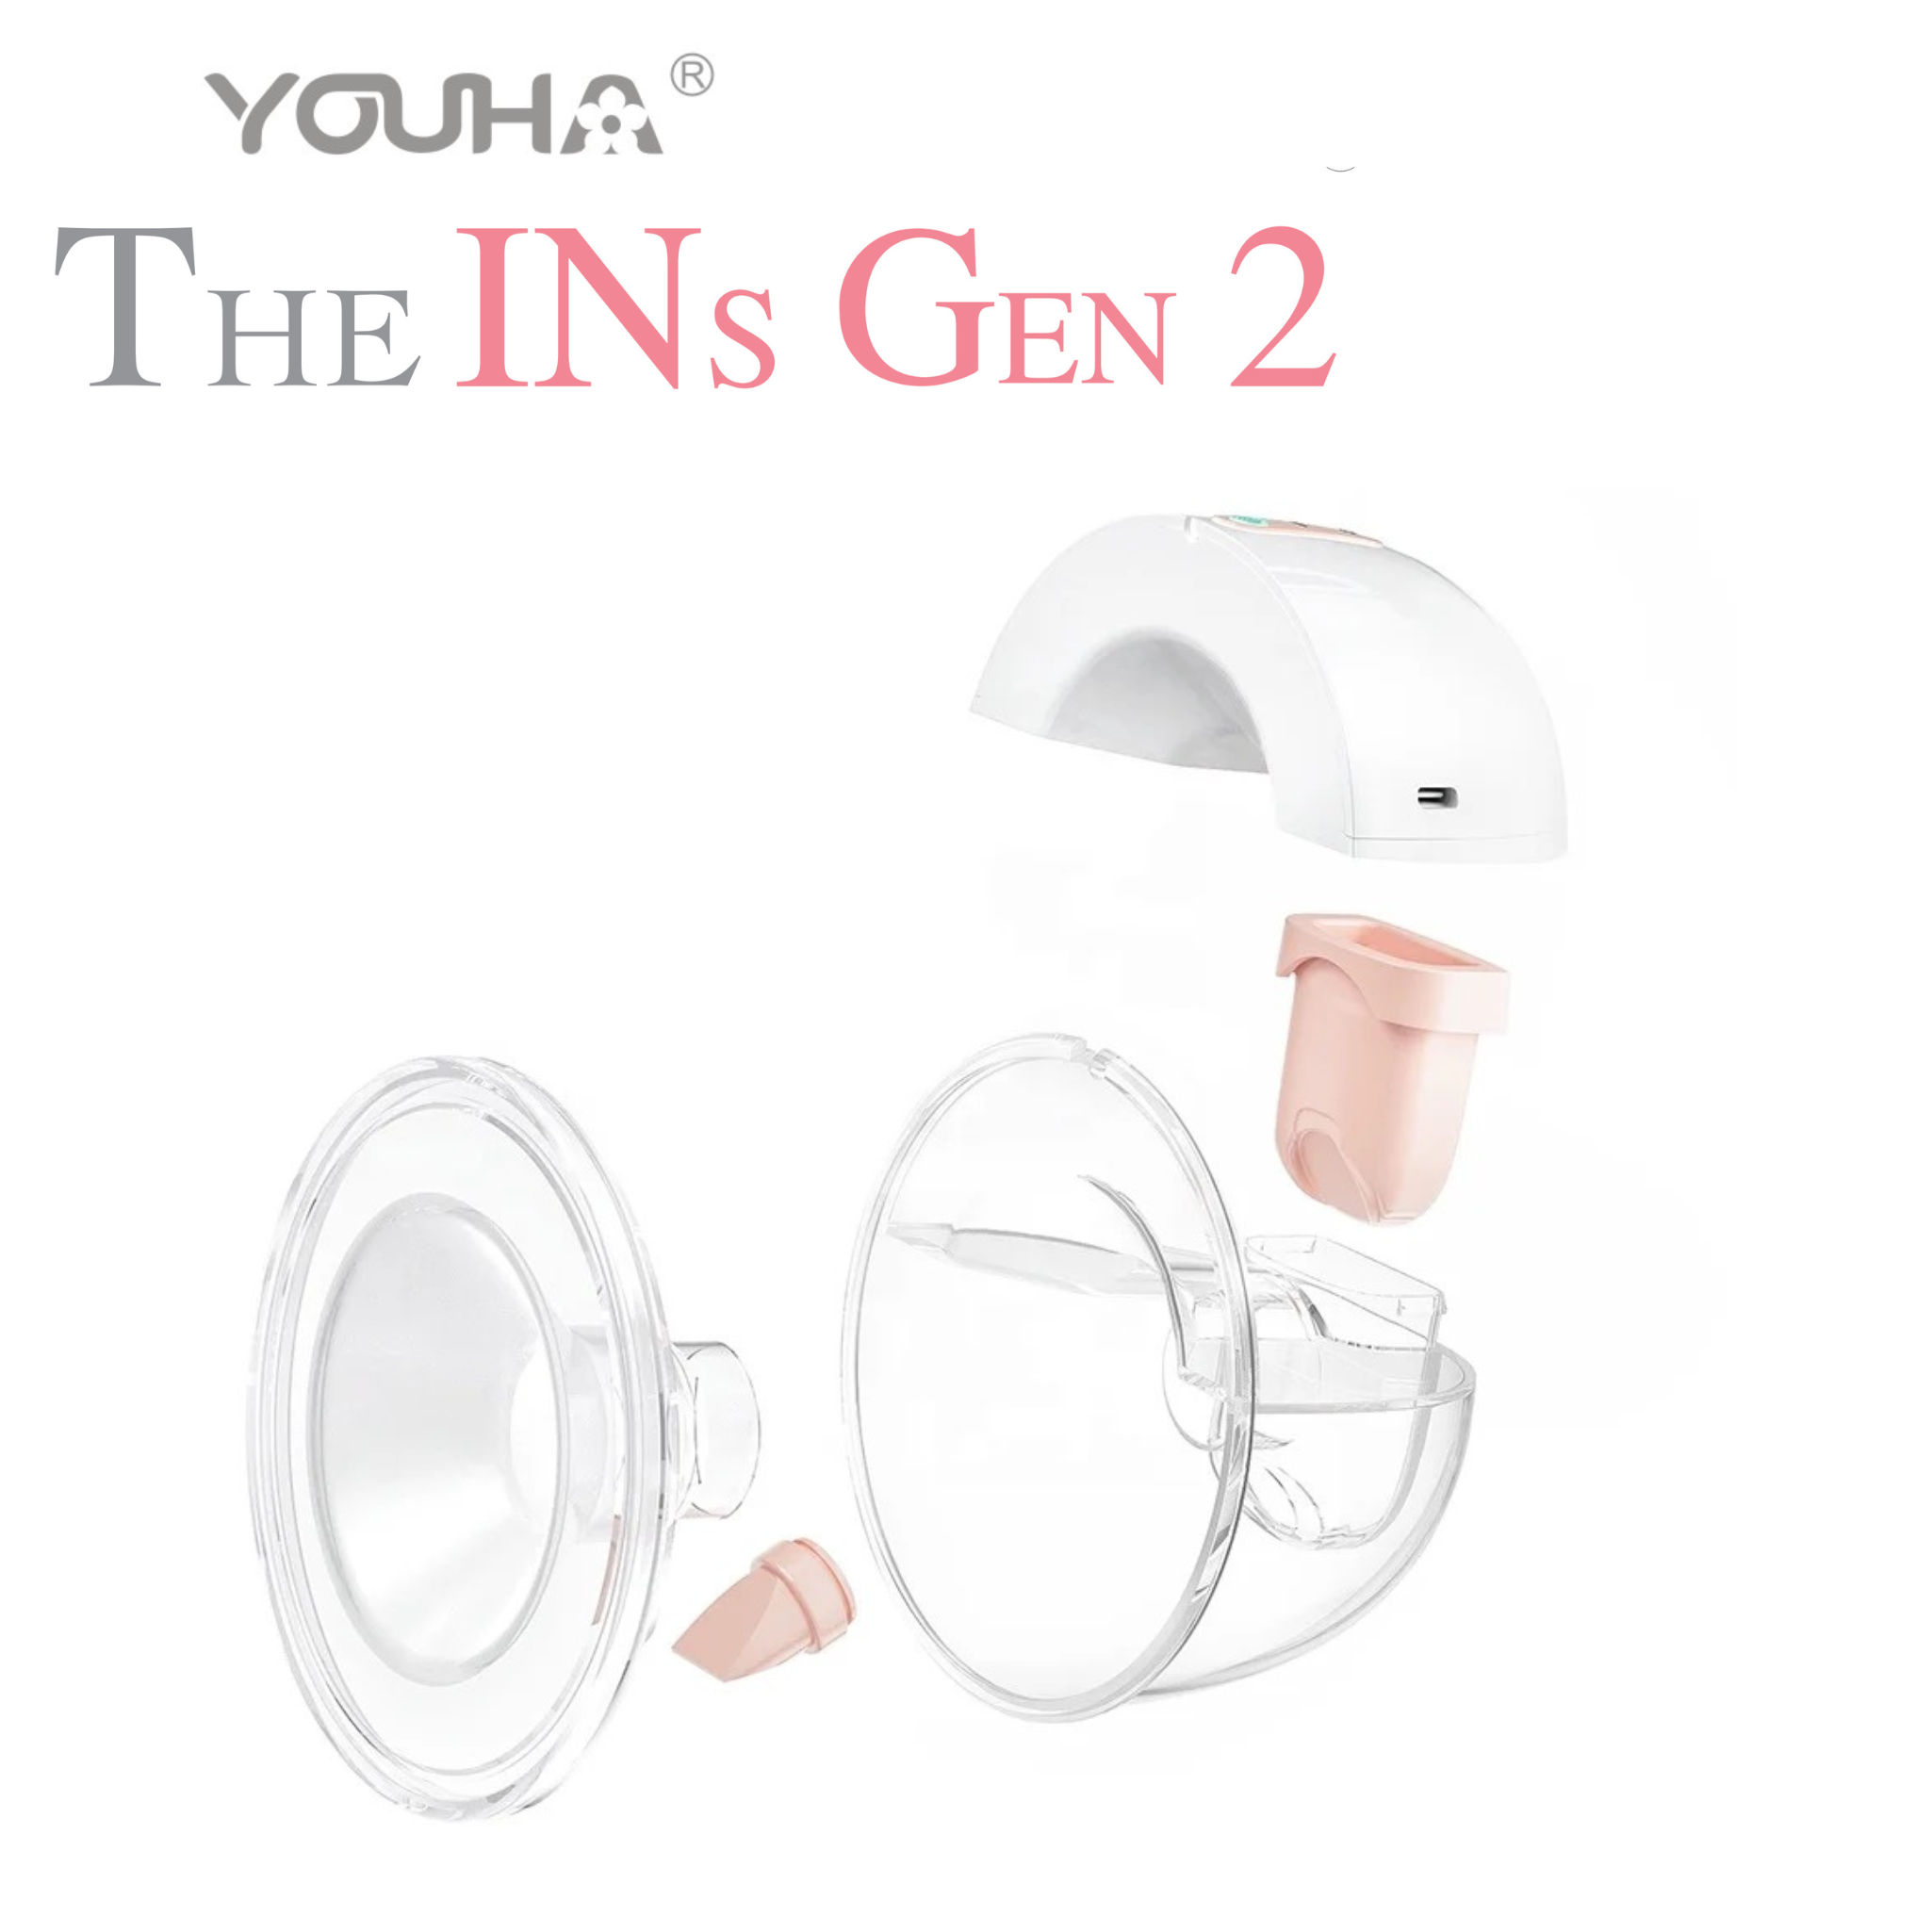 The INs Gen 2 Wearable Breast Pump with App Function